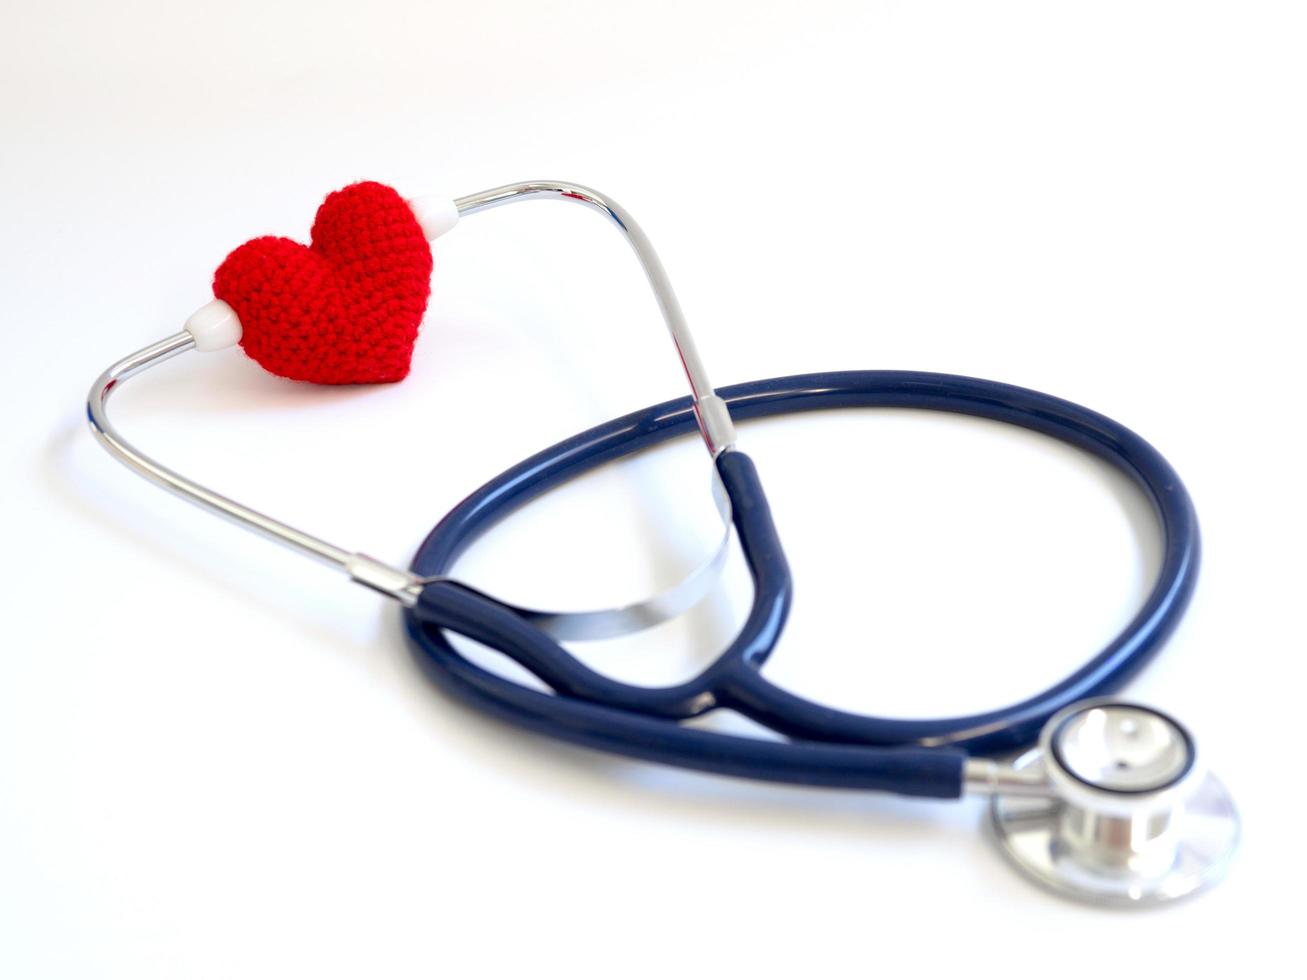 red heart using stethoscope on the white background Isolated background.  Concept of love and caring patient by the heart. Copy space for the text and contents photo